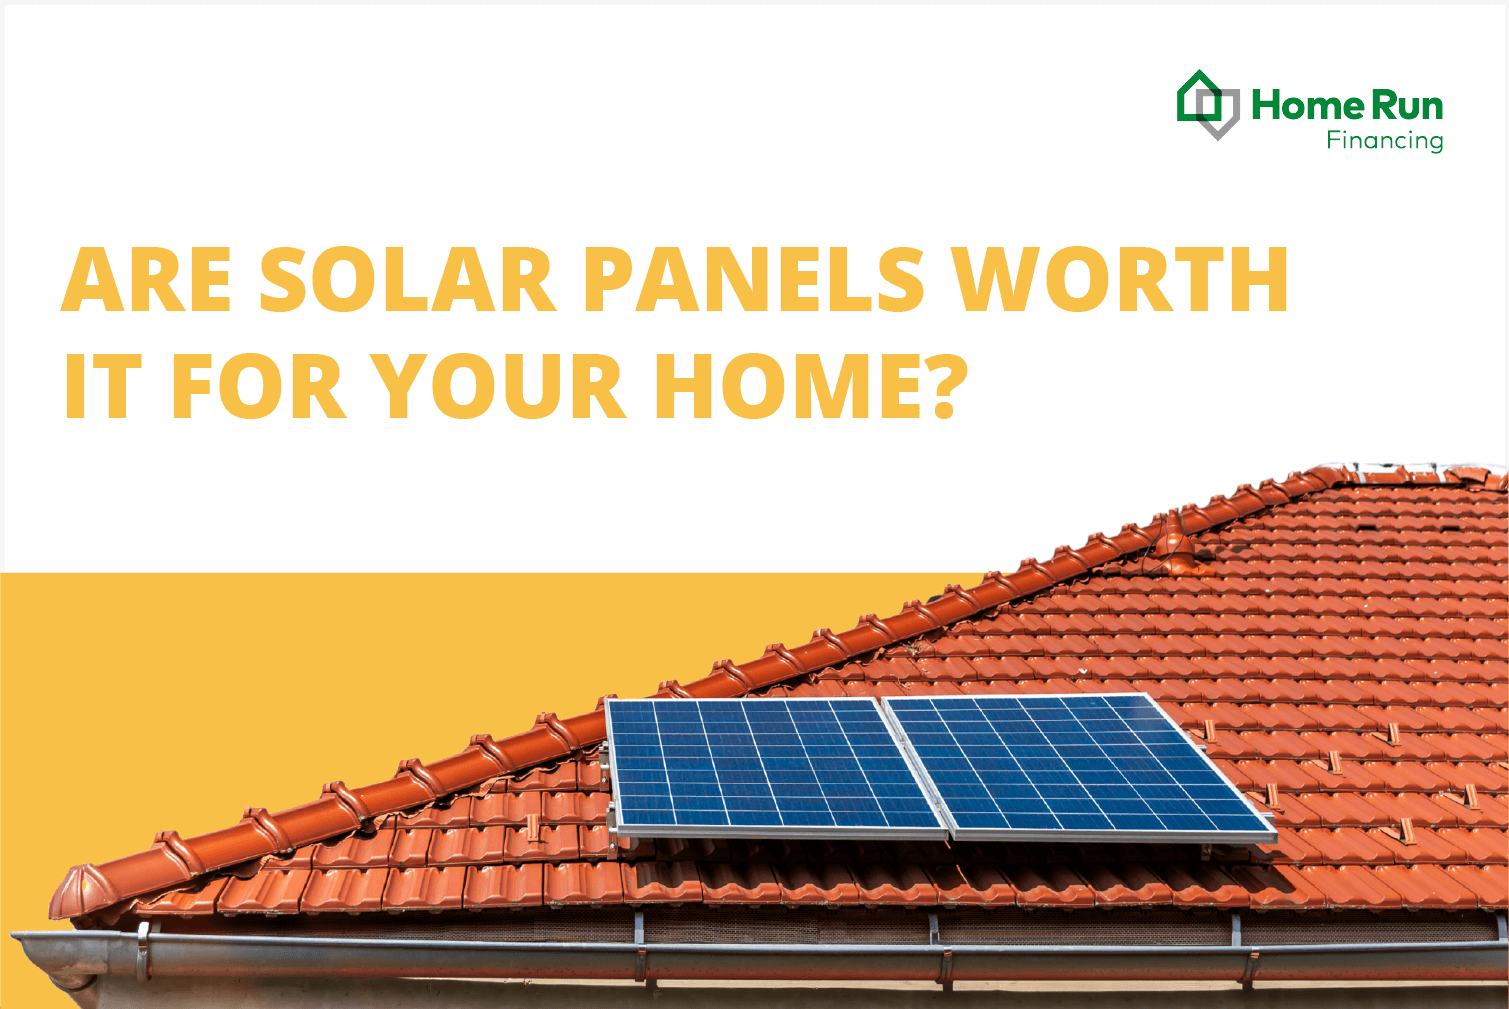 are solar panels worth it for your home?